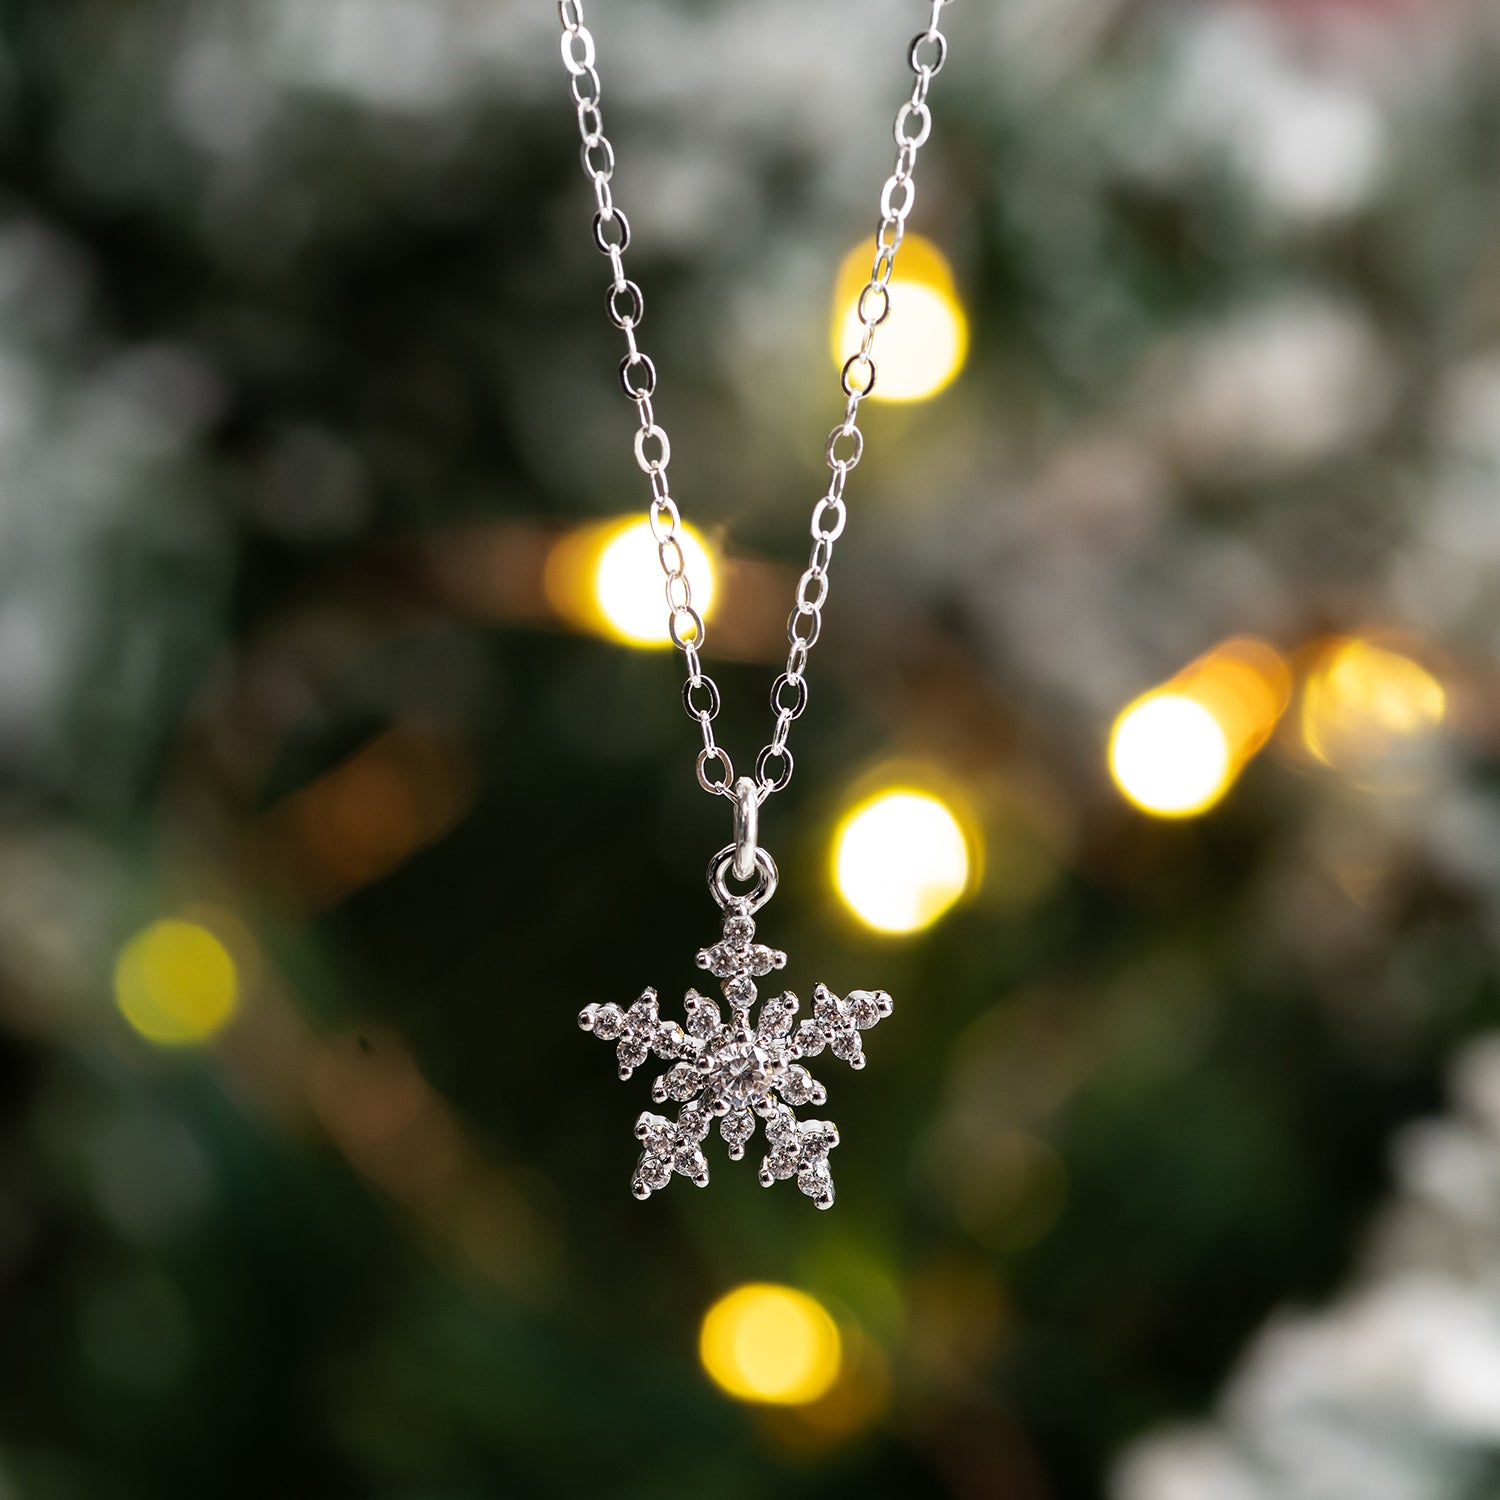 Snowflake Jewelry Gifts for Women